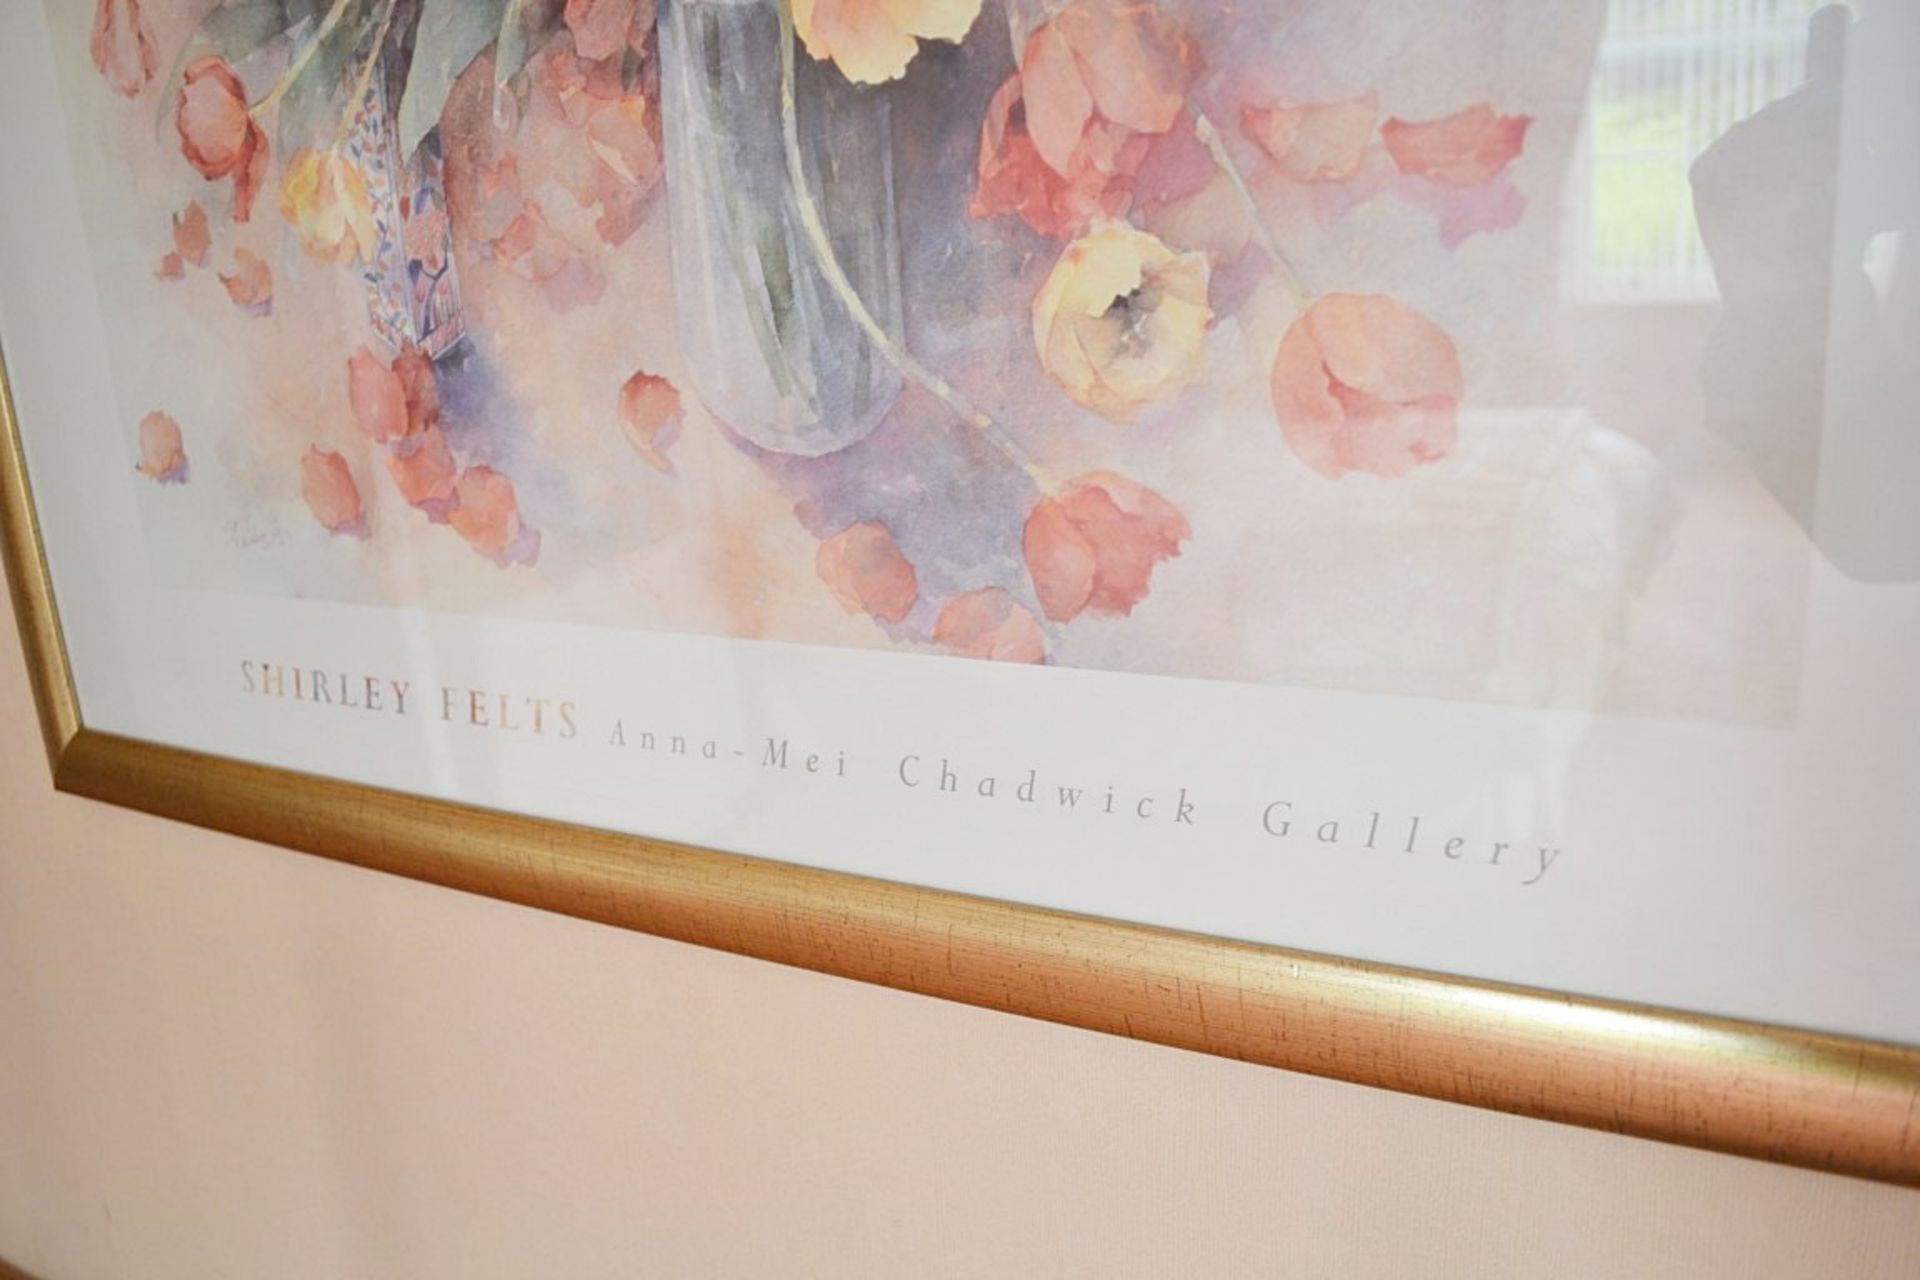 1 x Large Framed Floral Art Print - From A Clean Manor House Environment In Good Condition - - Image 2 of 2